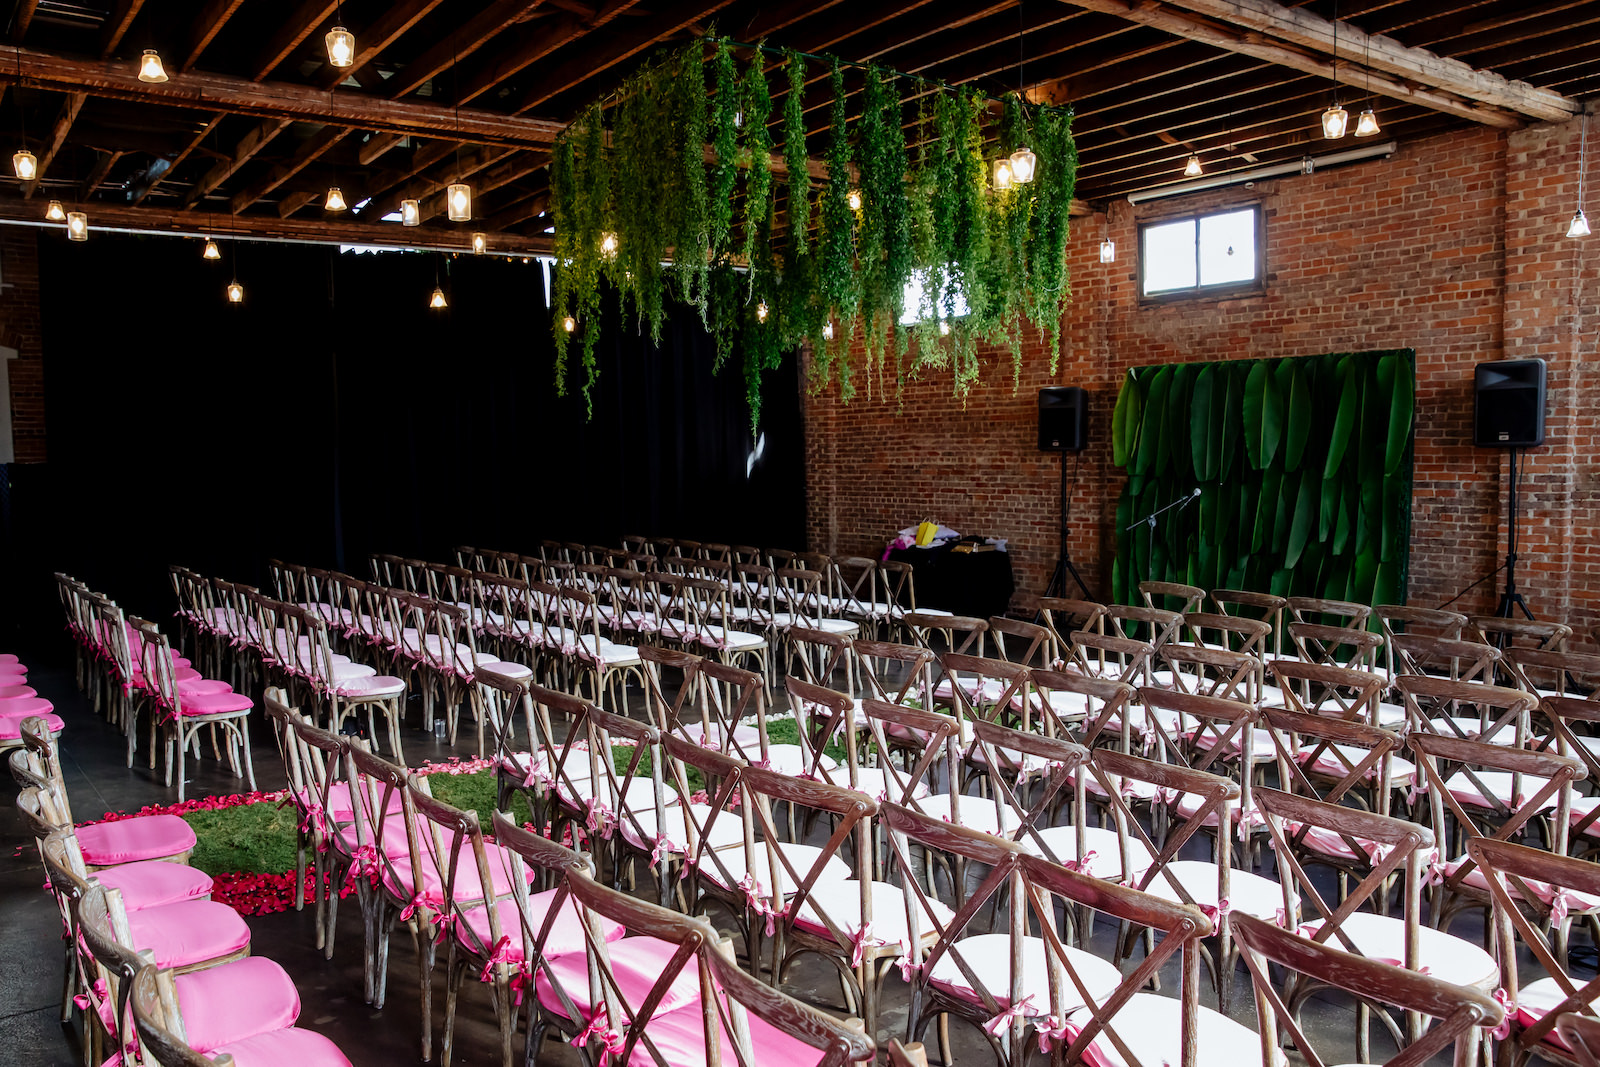 Modern Wedding Ceremony Backdrop with Tropical Palm Leaves and Moss Aisle Runner with Ombre Pink and White Rose Petals | Wood Cross Back Chairs and Historic Brick Walls | Suspended Greenery Garland Ceiling Installment Wedding Floral Chandelier